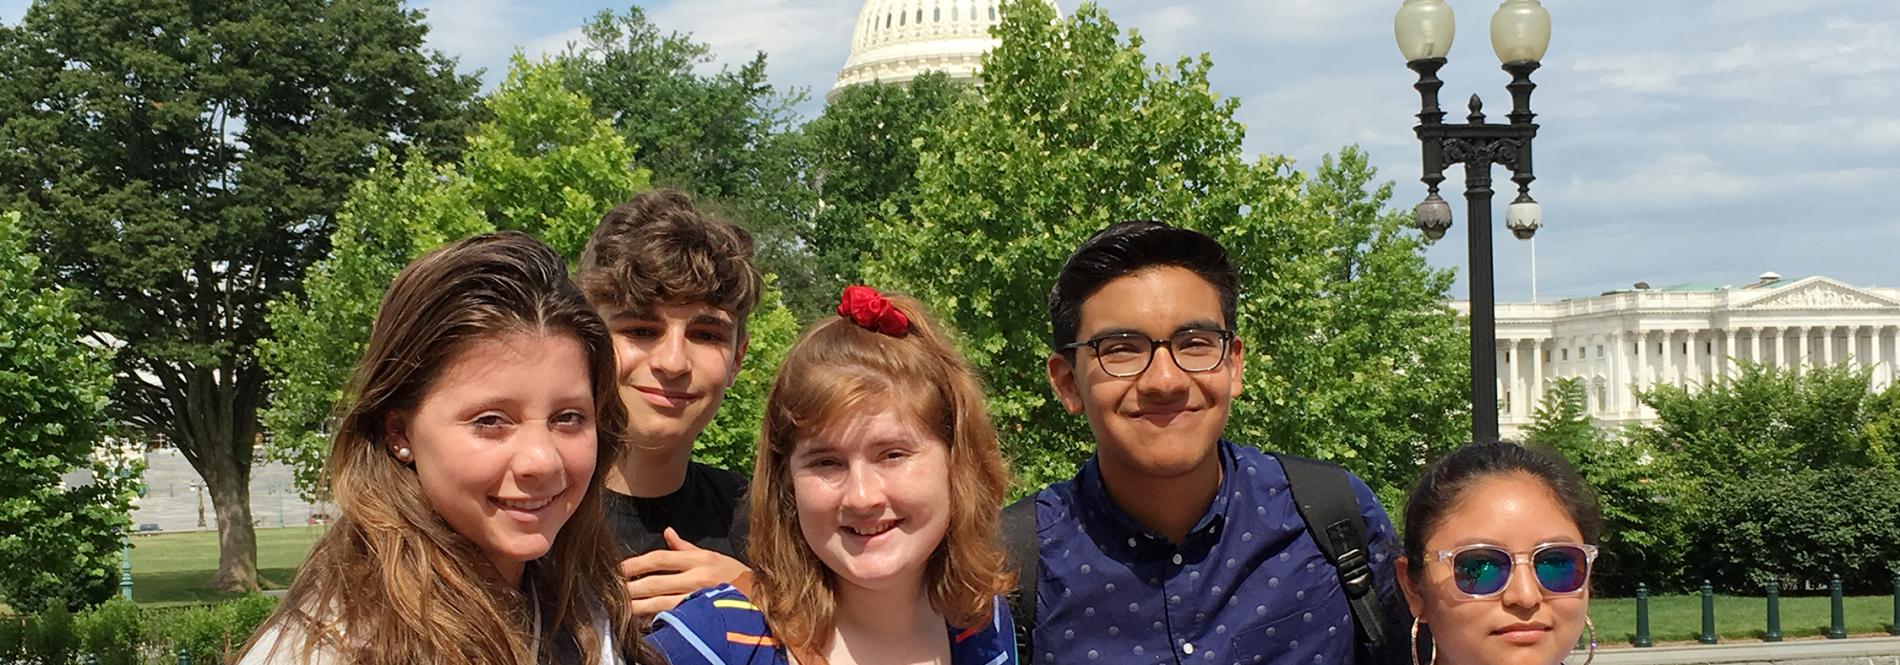 High school juniors invited to apply for trip to Washington D.C.